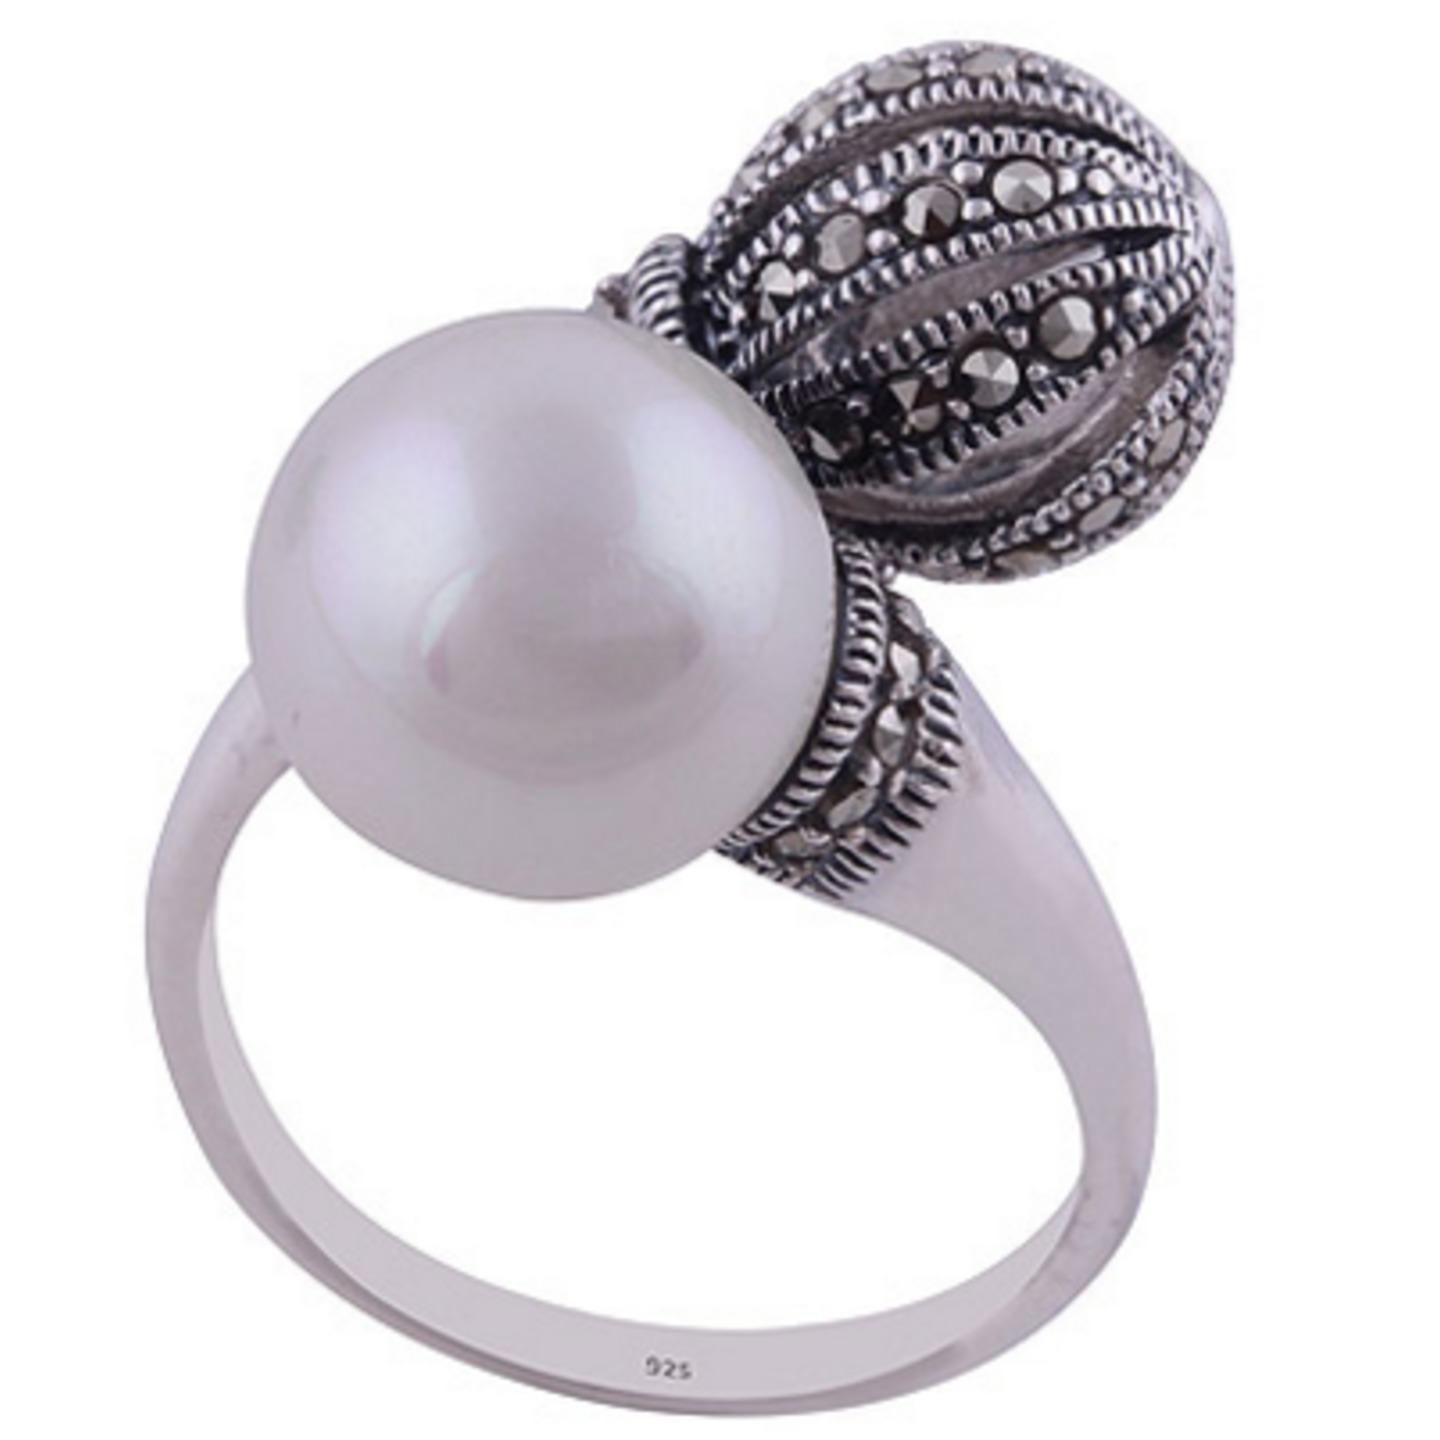 The Pearl n Marcasite Sphere Silver Ring